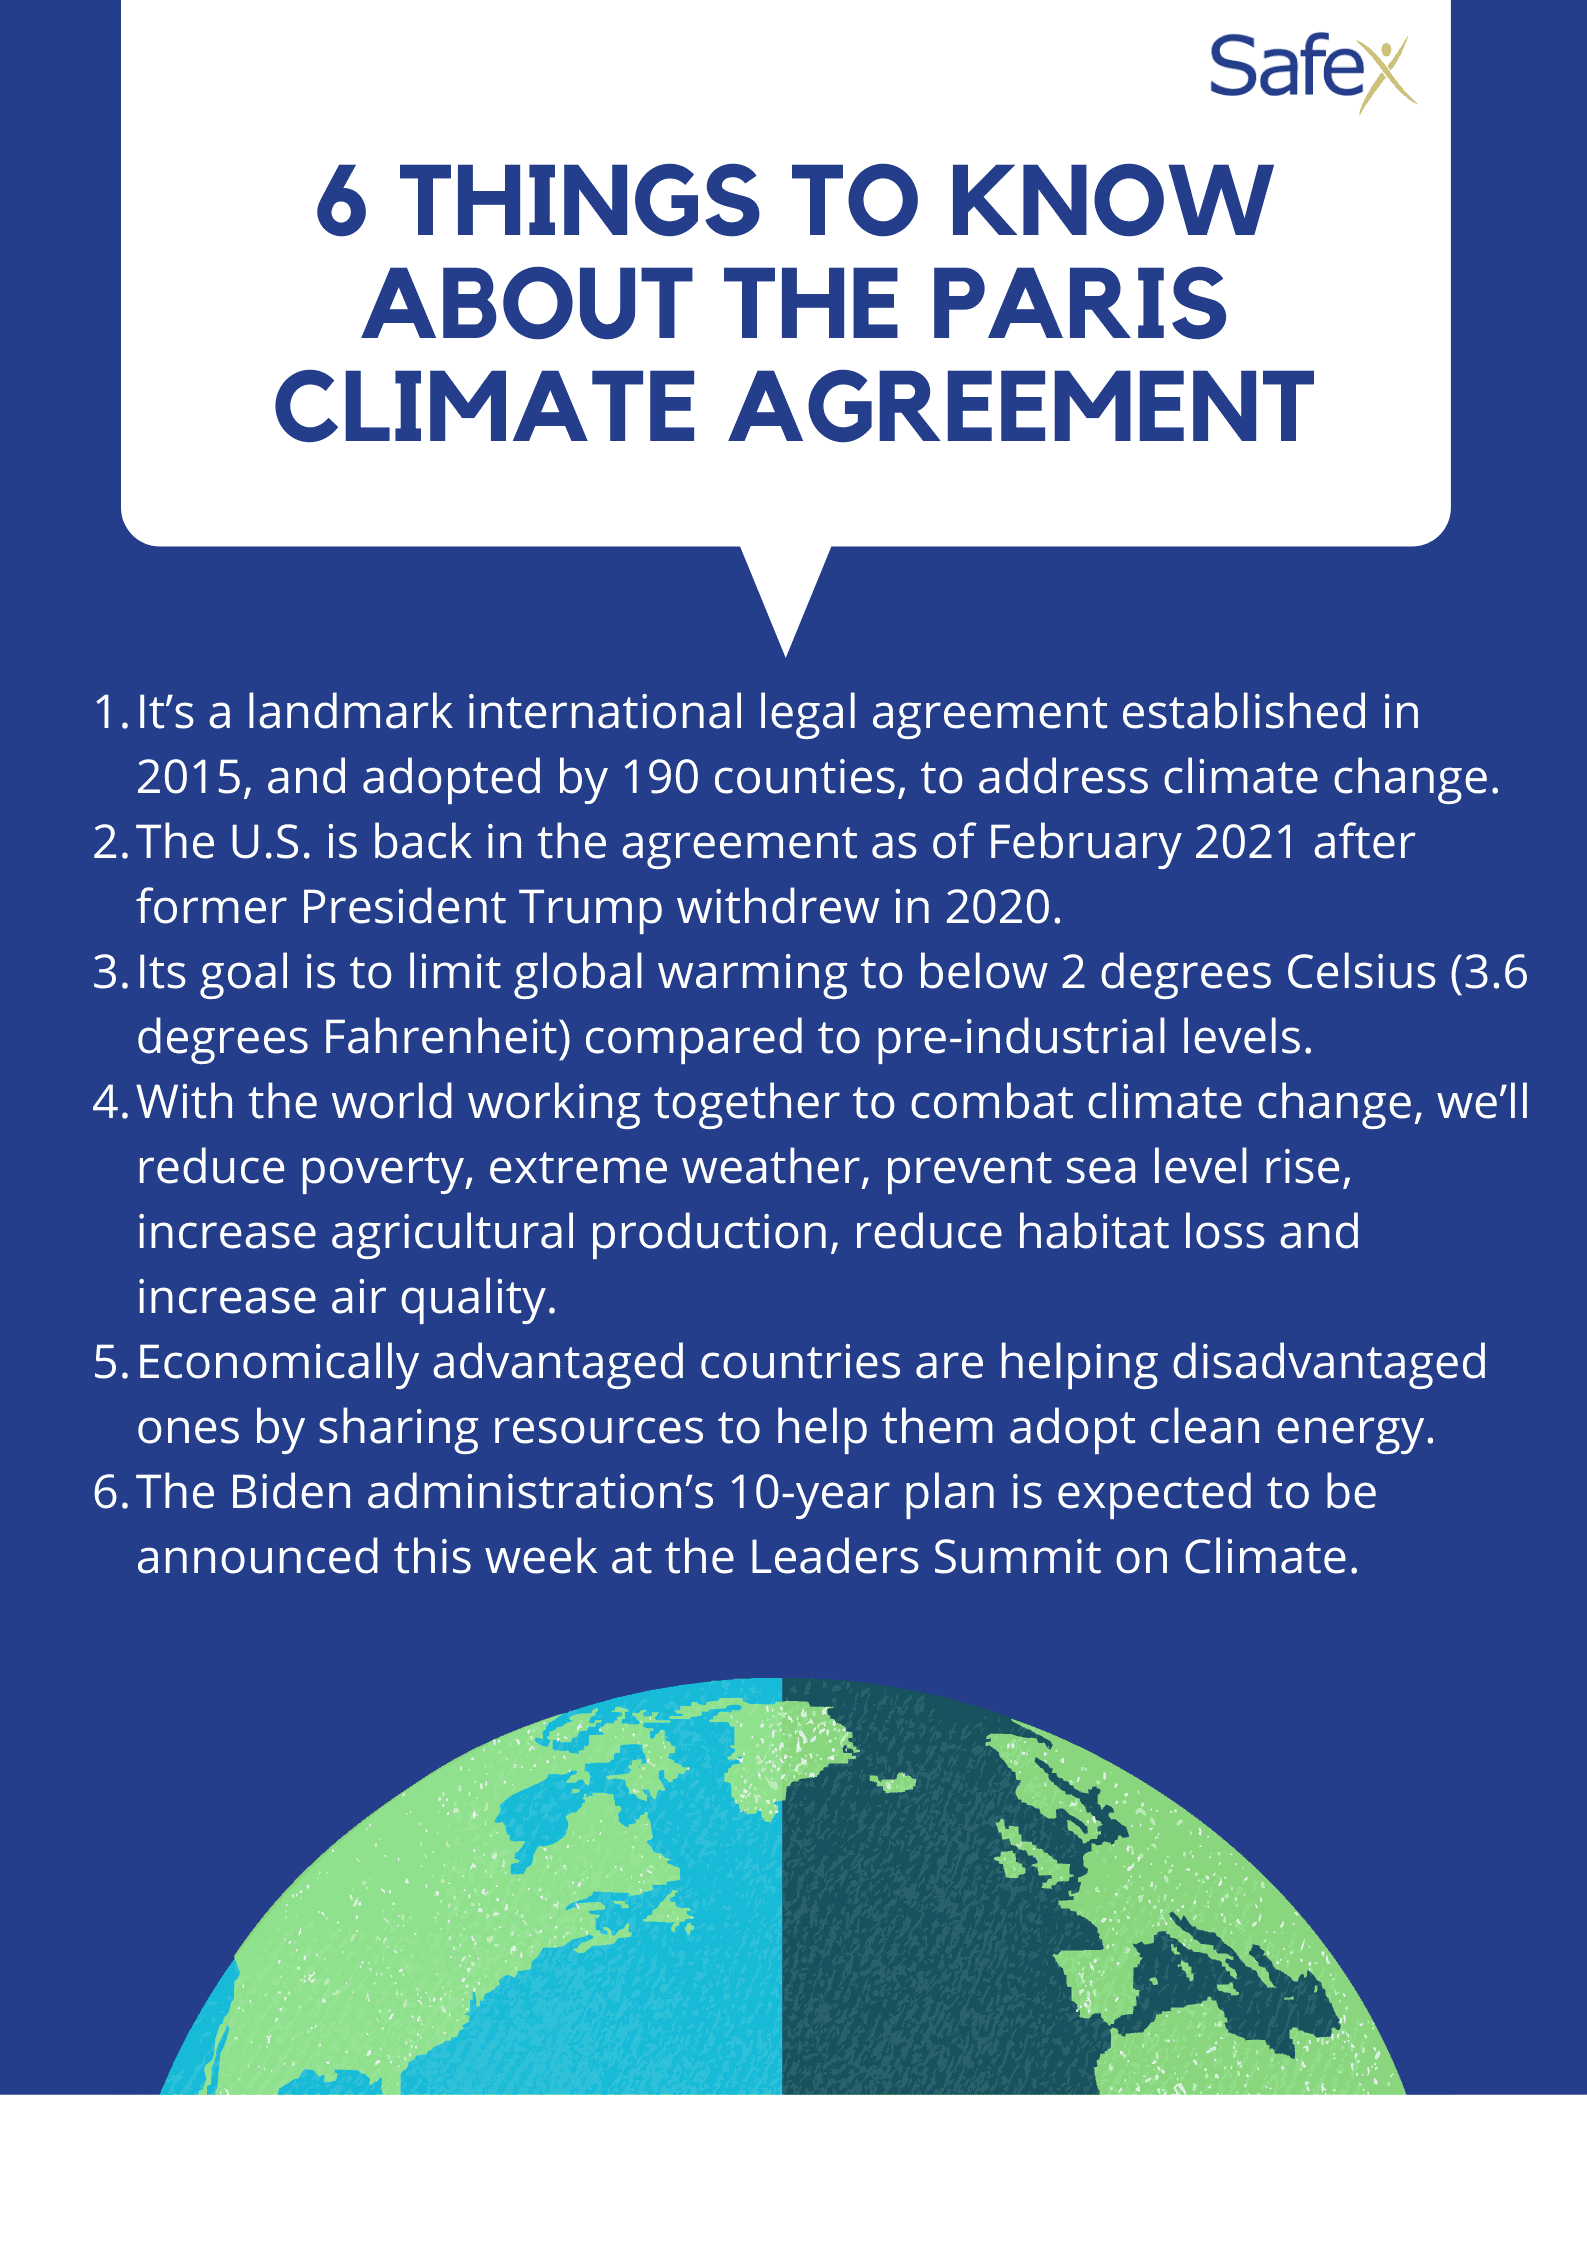 8 things To Know About the Paris Climate Agreement